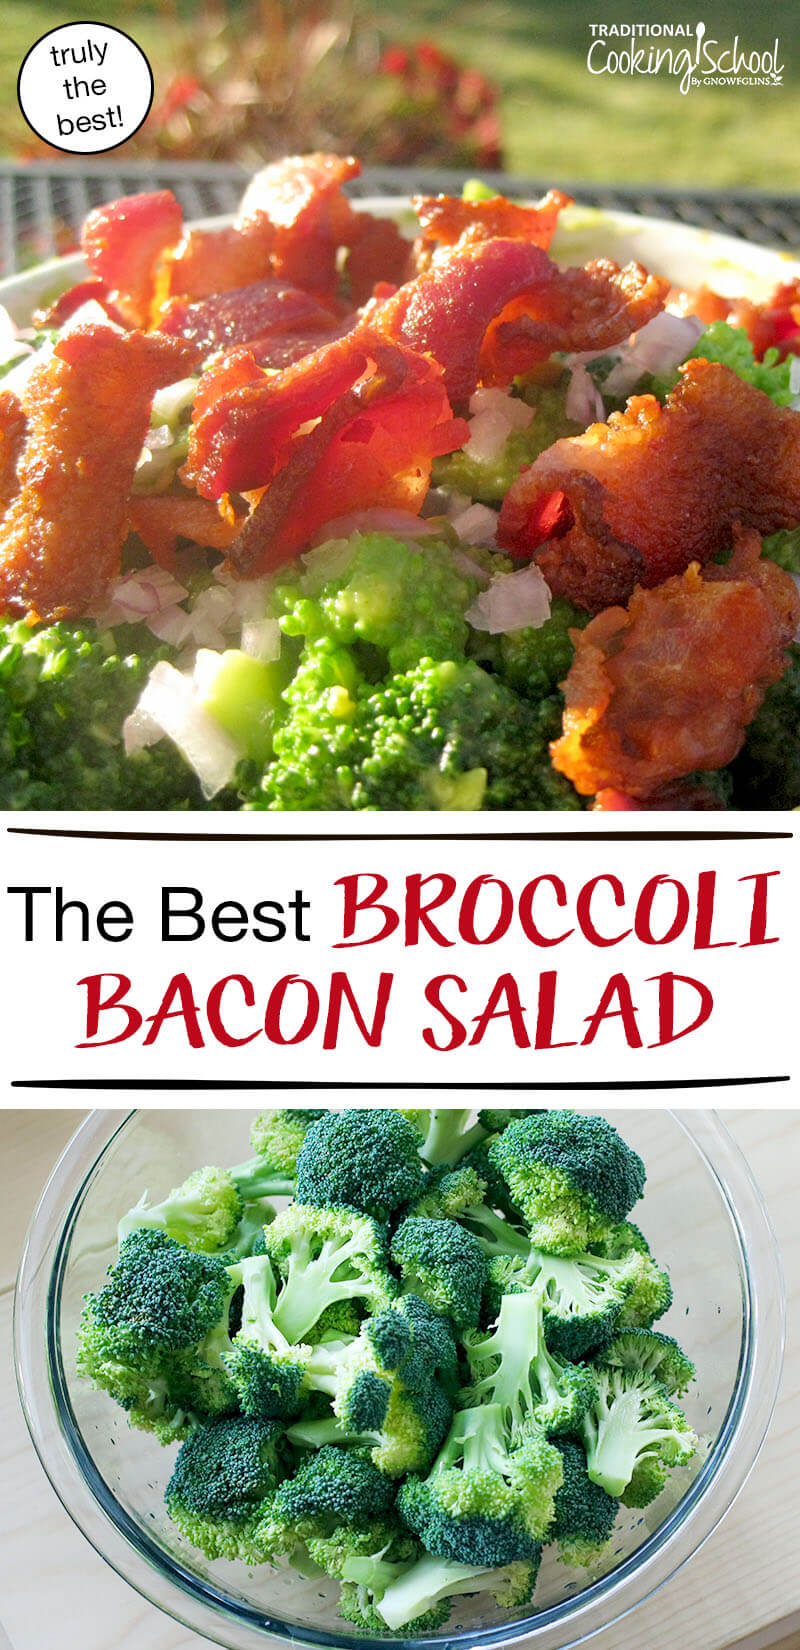 The Best Broccoli Bacon Salad {truly!} | I suppose it is a bit presumptuous of me to share this recipe a few months ahead of broccoli season, but -- trust me -- you'll want this recipe in hand when your kitchen overflows with green florets later this summer. | TraditionalCookingSchool.com